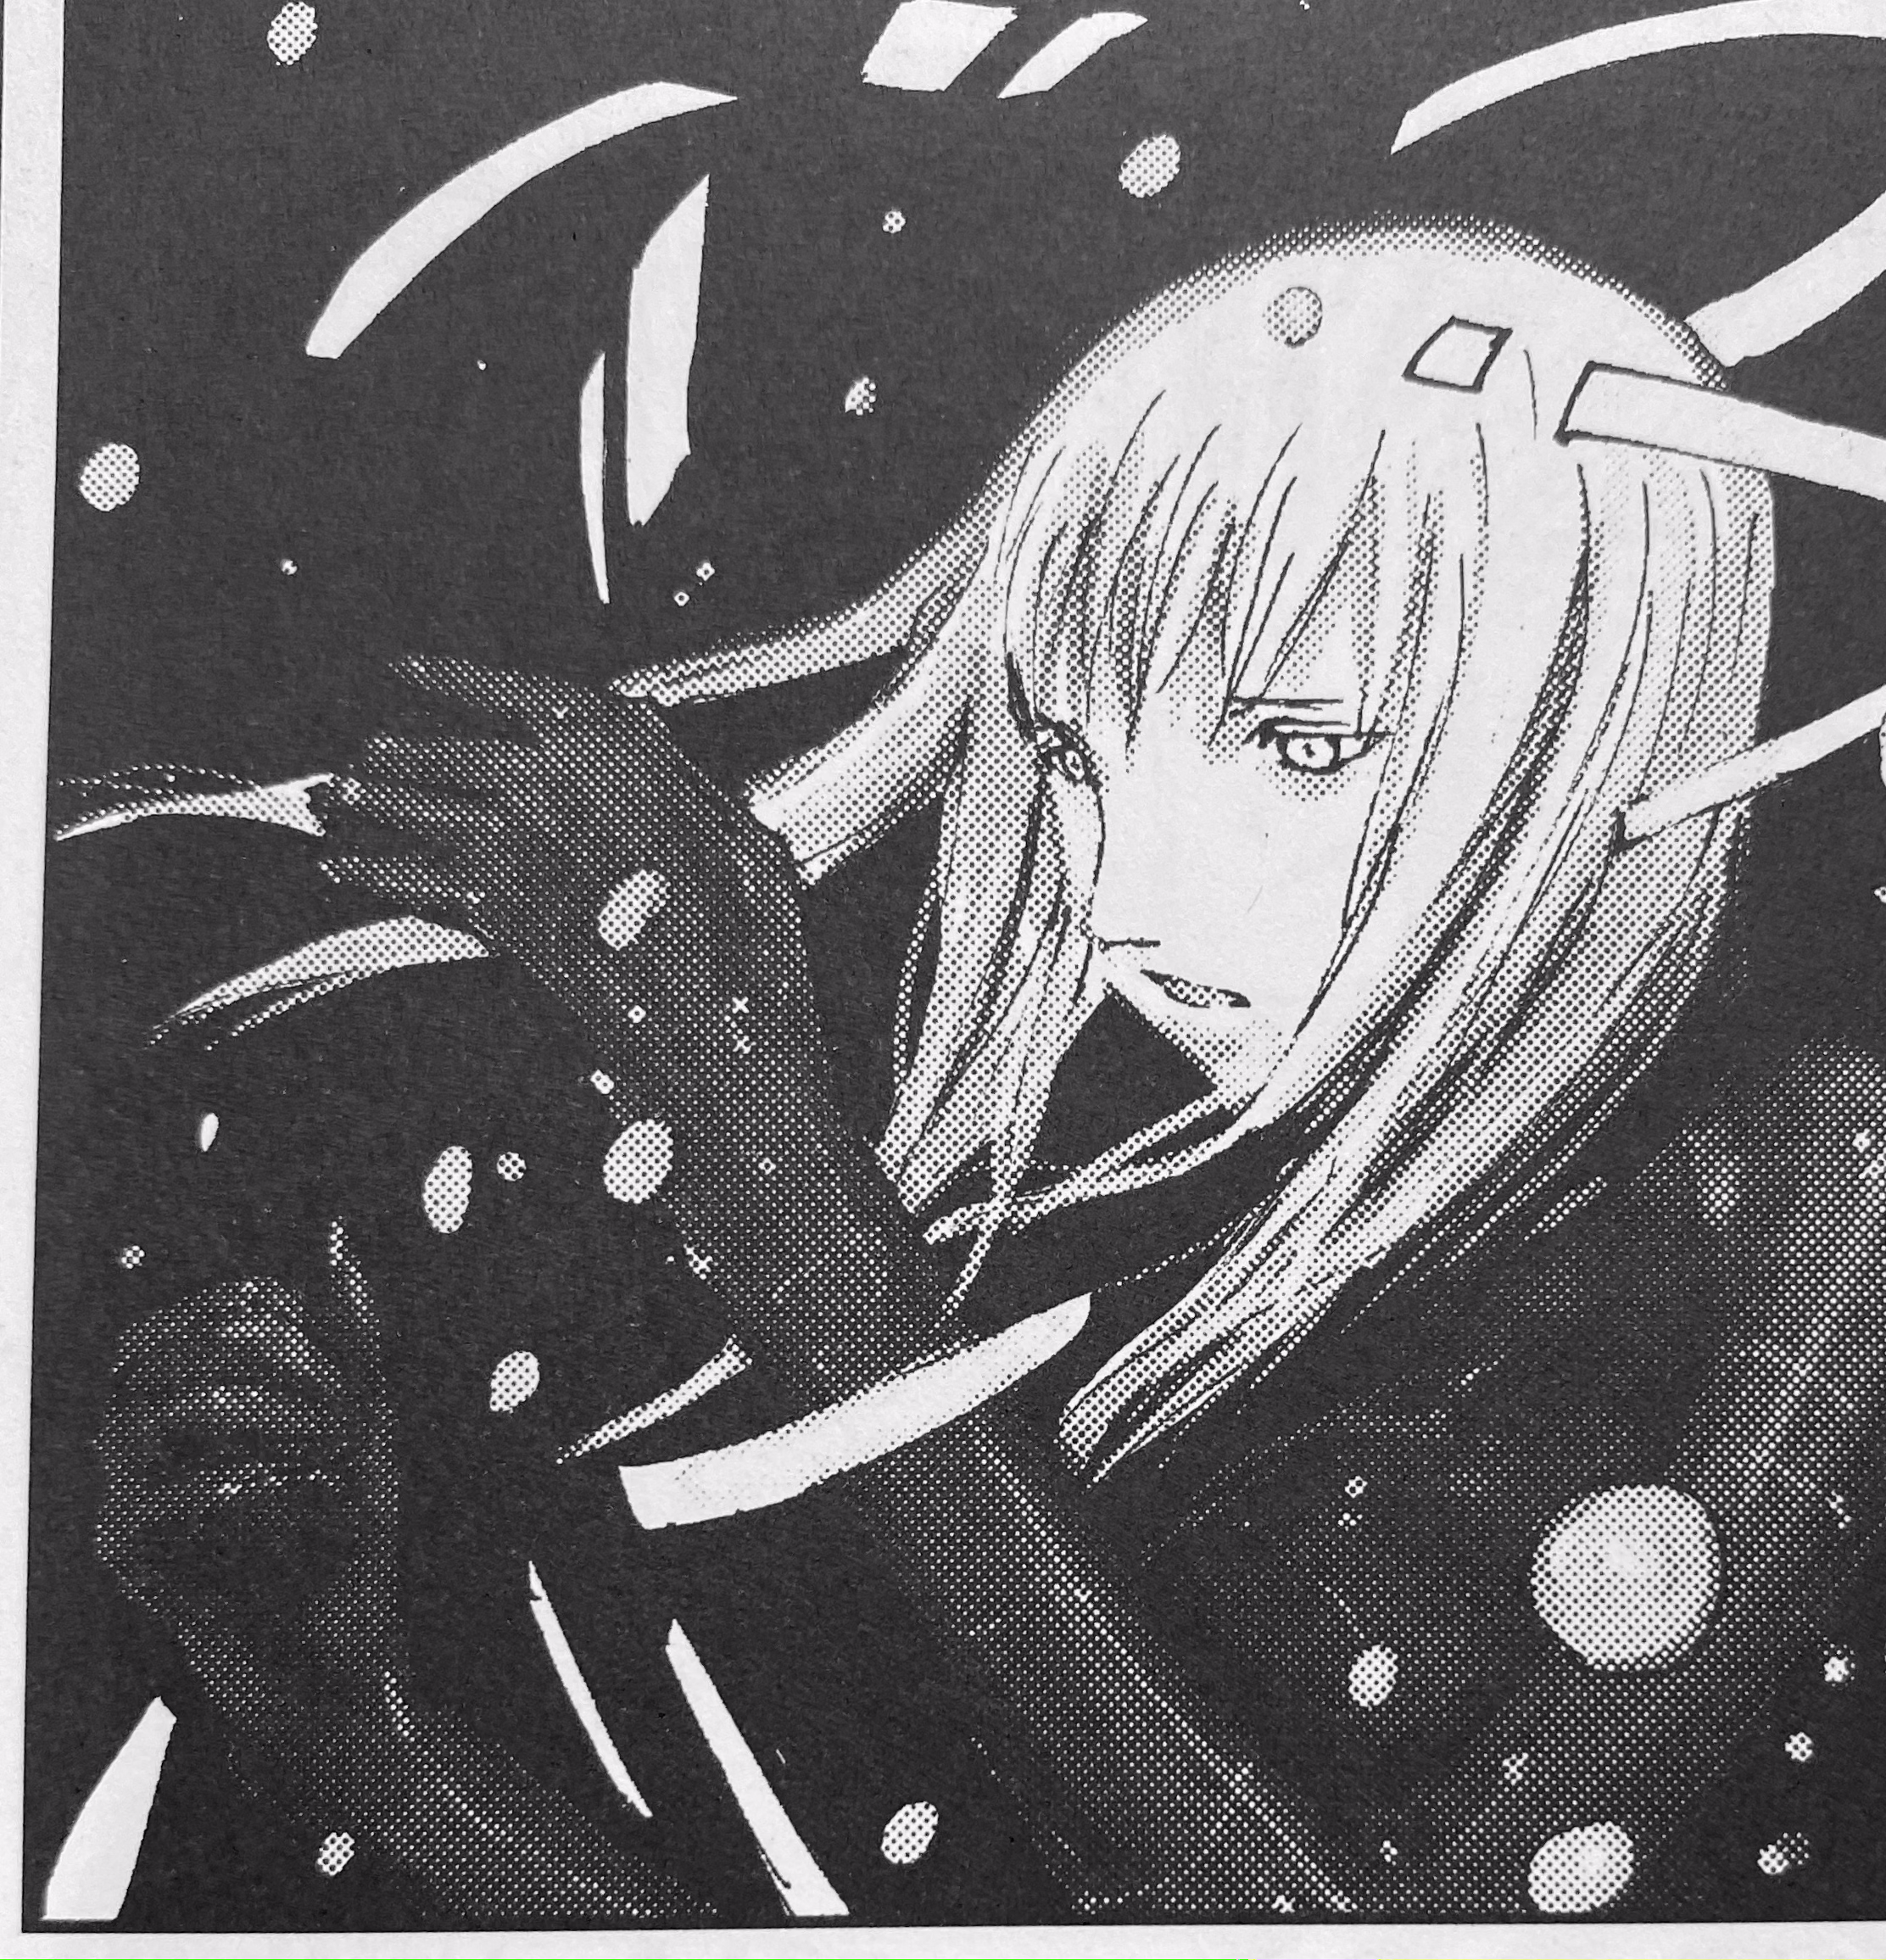 this is another one of my favorite images of cibo <3 i love the way her hair flows here <br><br> [image id: a panel from blame! showing cibo in the netsphere. she is in a dark void surrounded by floating white lines and circles. holds up her hands and looks at them in wonder, her hair flowing as though in water or wind. /end id]